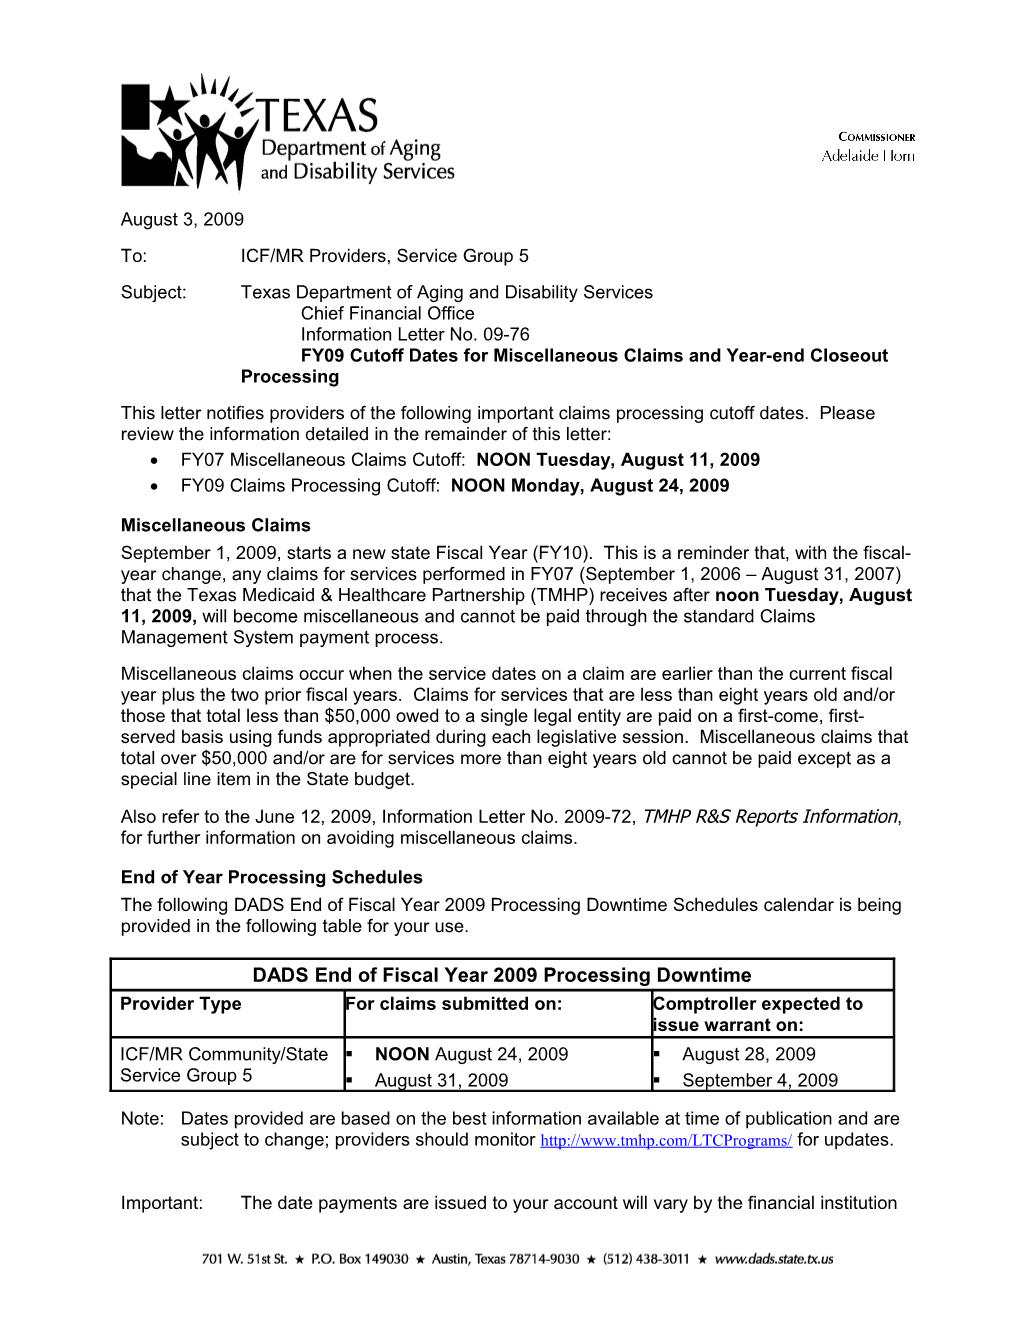 IL 09-076 FY09 Cutoff Dates for Miscellaneous Claims and Year-End Closeout Processing